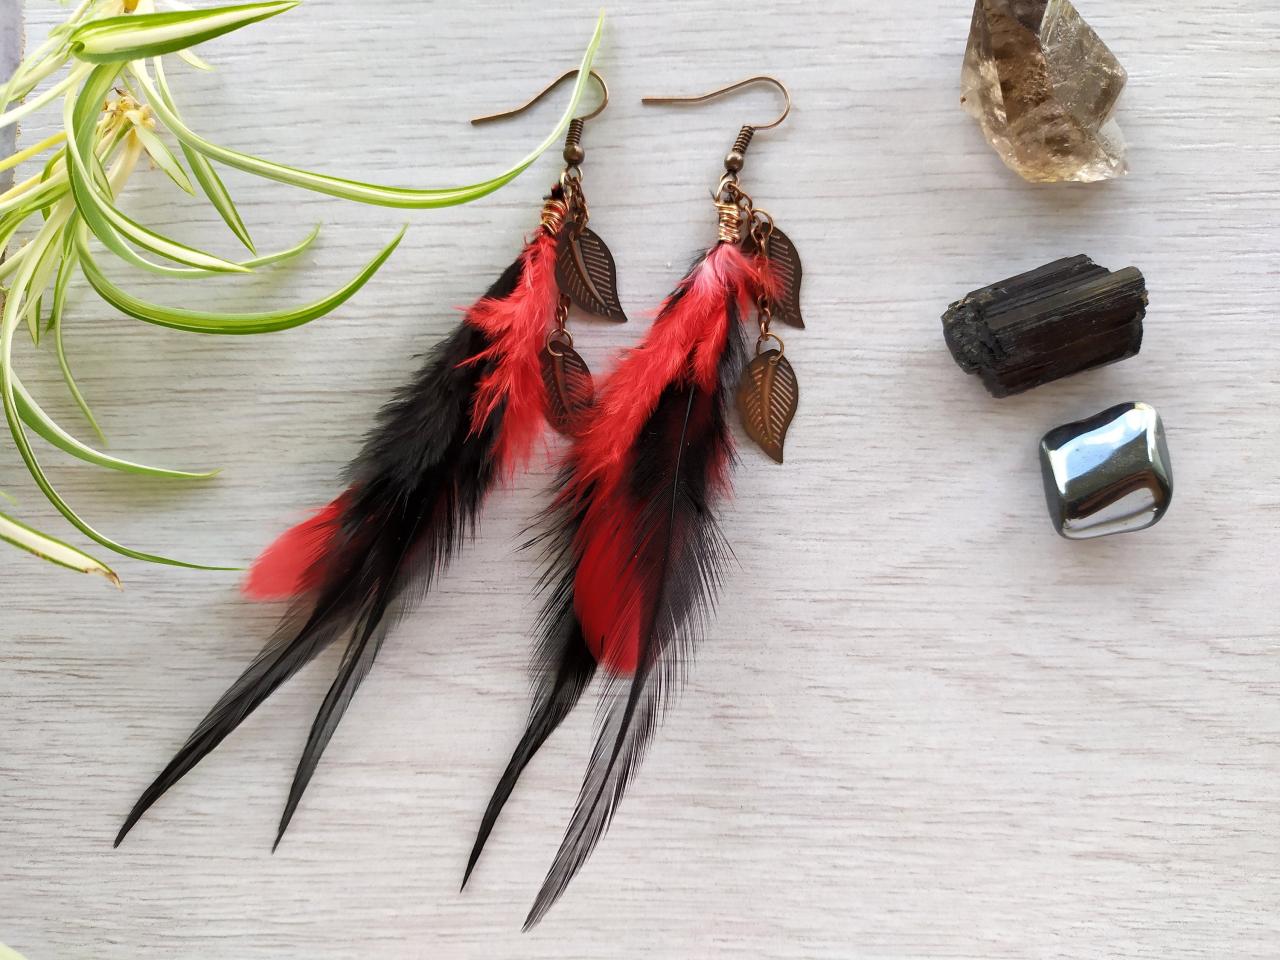 Long Black And Red Boho Feather Earrings, Long Chandeliers With Black Red Feathers, Red And Copper Bohemian Dangle Earrings With Feathers